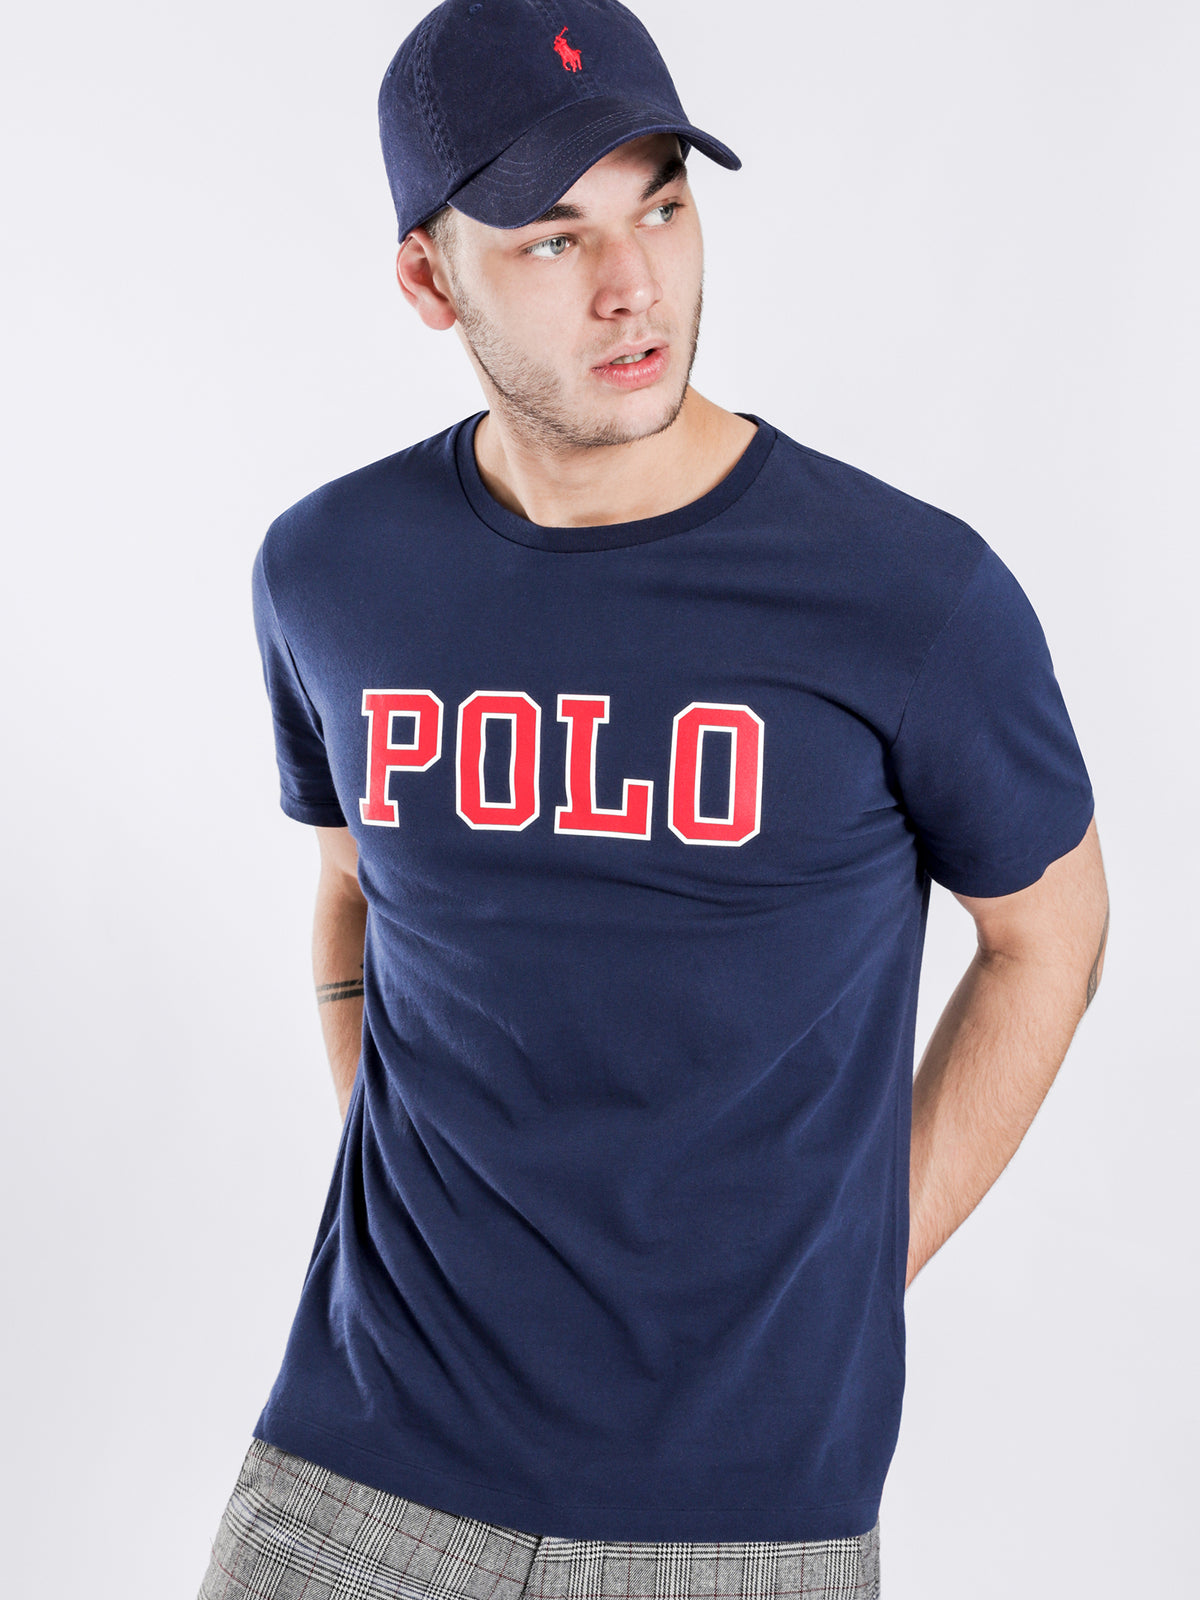 Classic Fit Short Sleeve T-Shirt in Navy